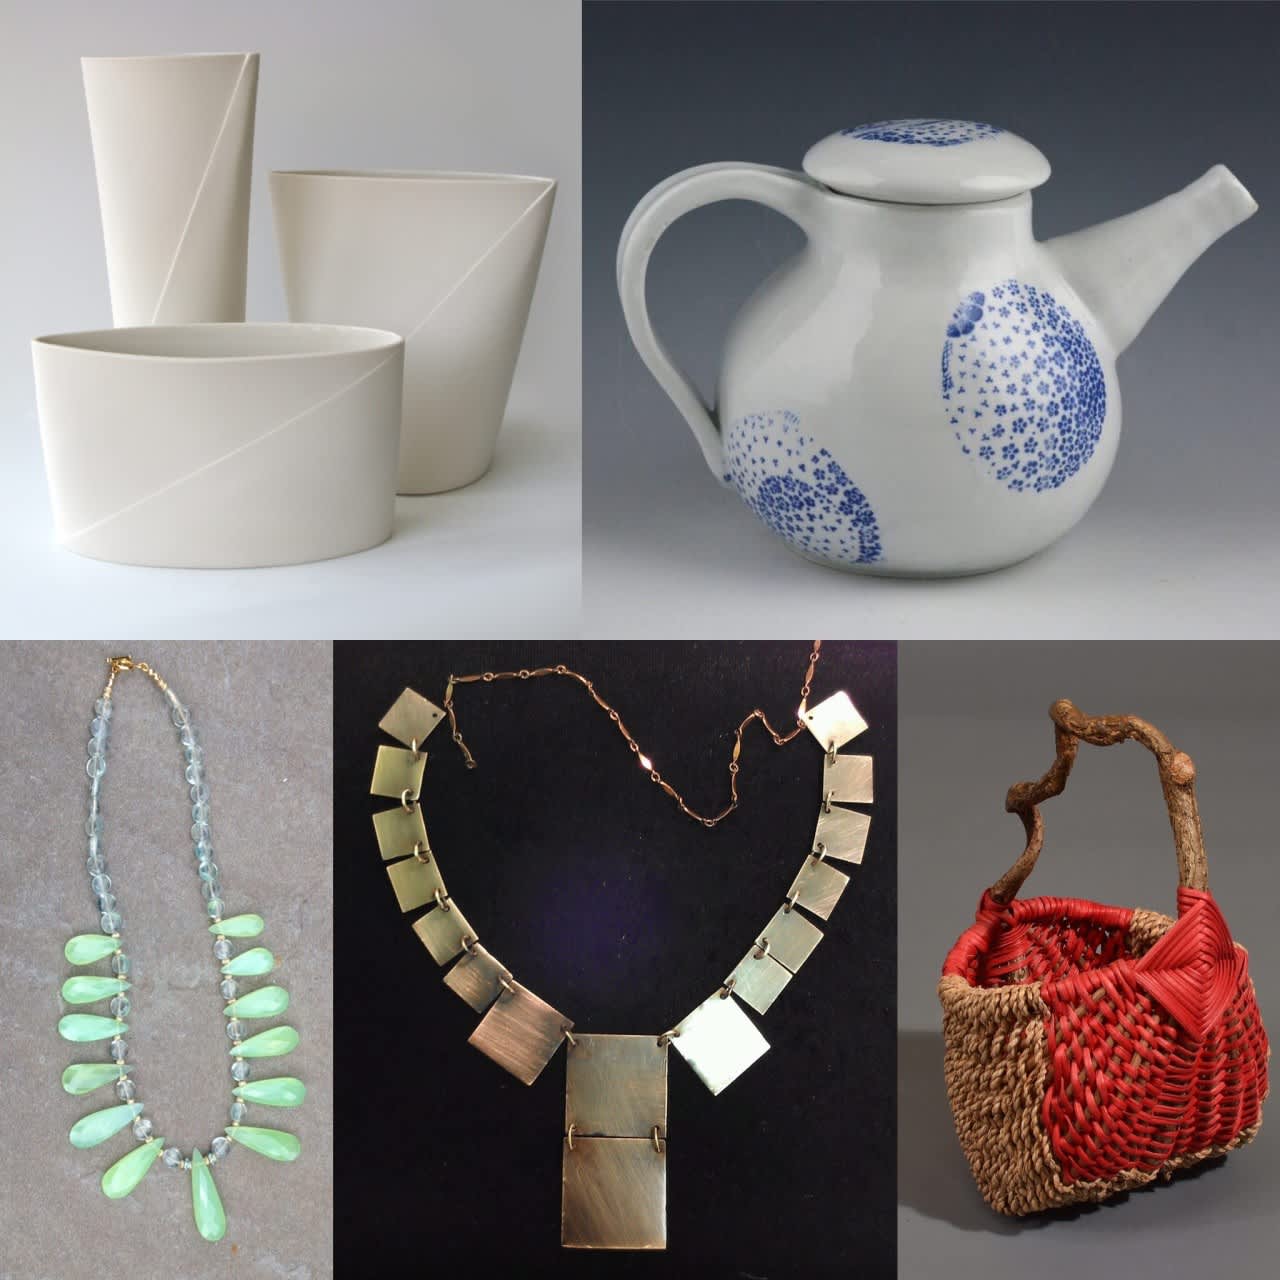 From the artisan trunk show, clockwise from top left: vases by Romi Hefetz, tea pot by Karen Ford, basket by Tina Puckett, necklace by Steve Wallerstein and necklace of faceted Parrot Green Onyx almond briolettes by NMS Designs.